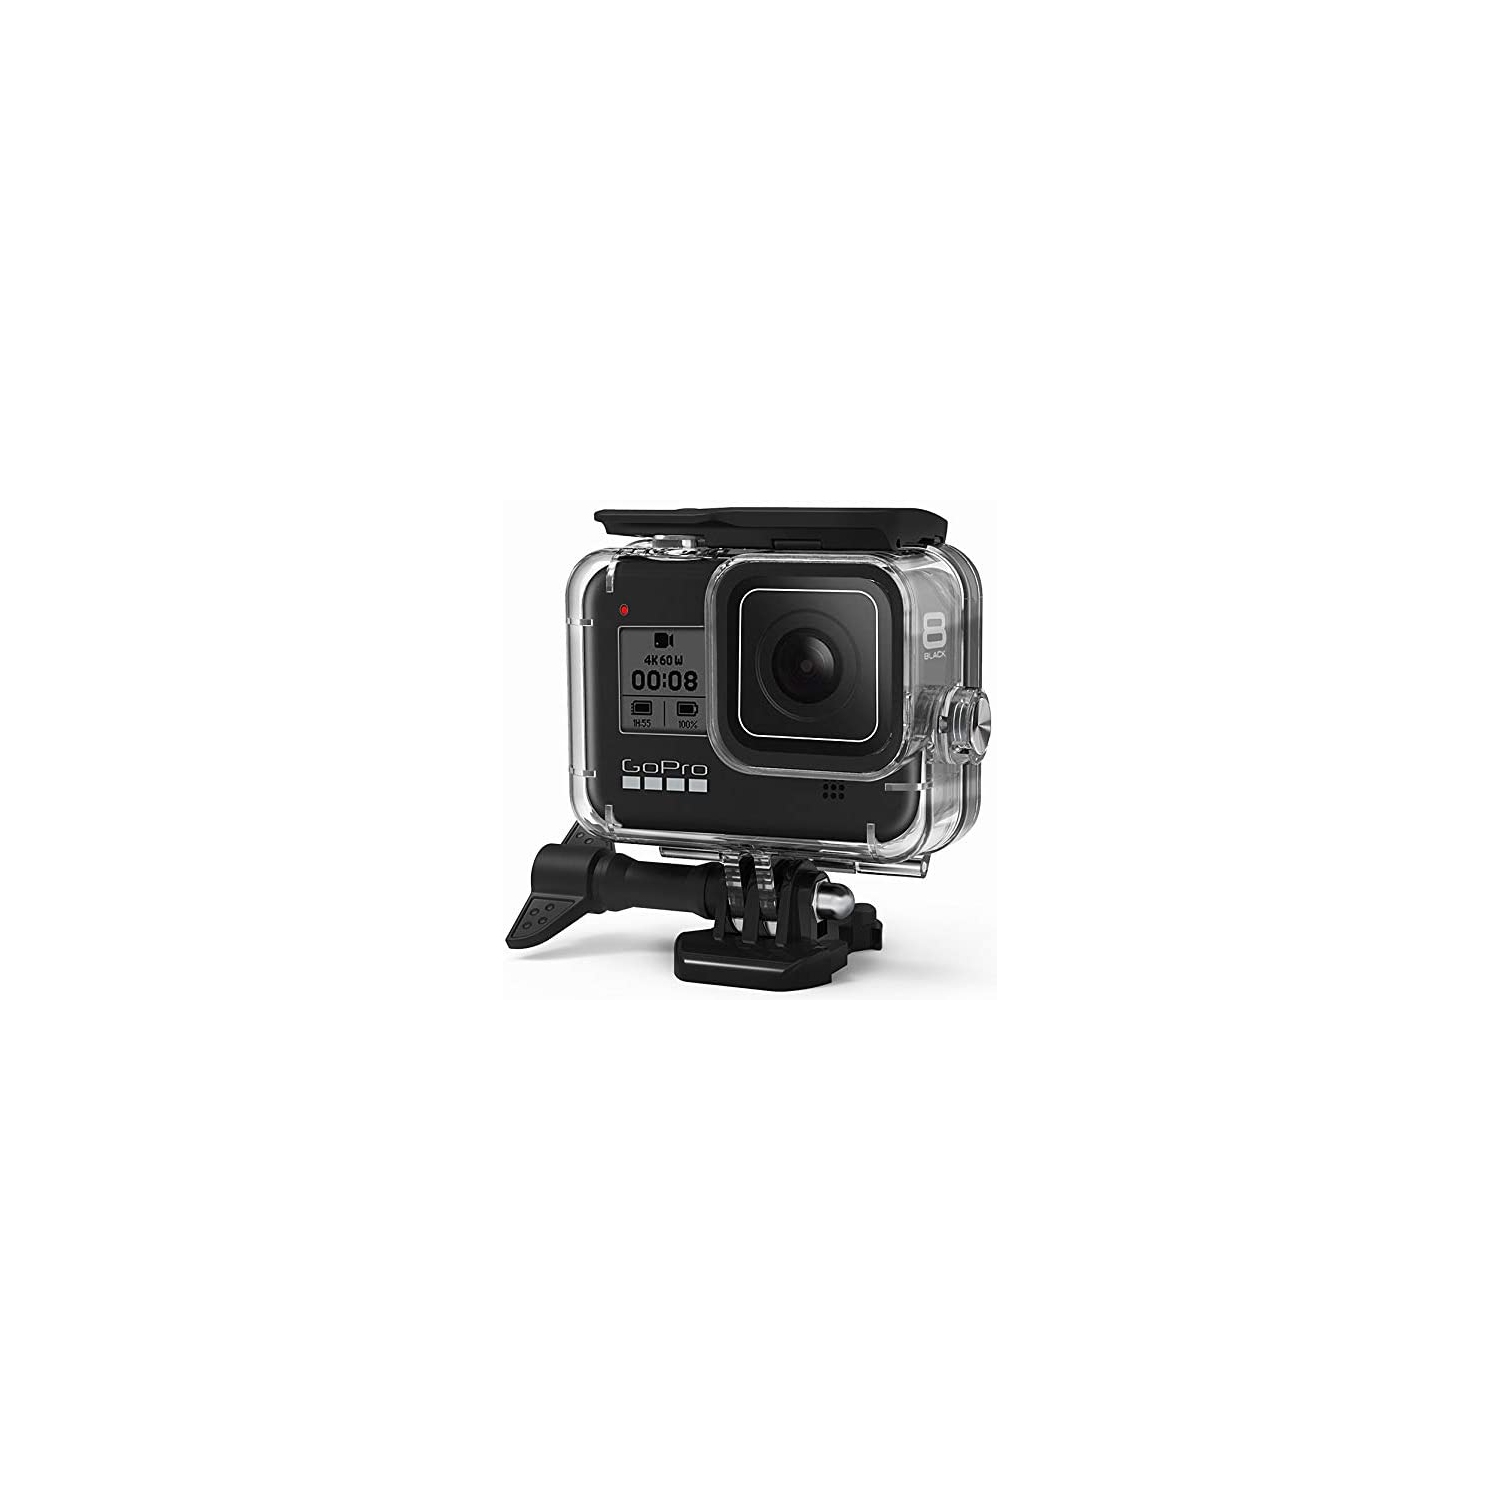 Waterproof Case for GoPro Hero 8 Black, Protective Underwater 60M Dive Housing Shell with Bracket Accessories for Go Pro Hero8 Action Camera - WINGOMART